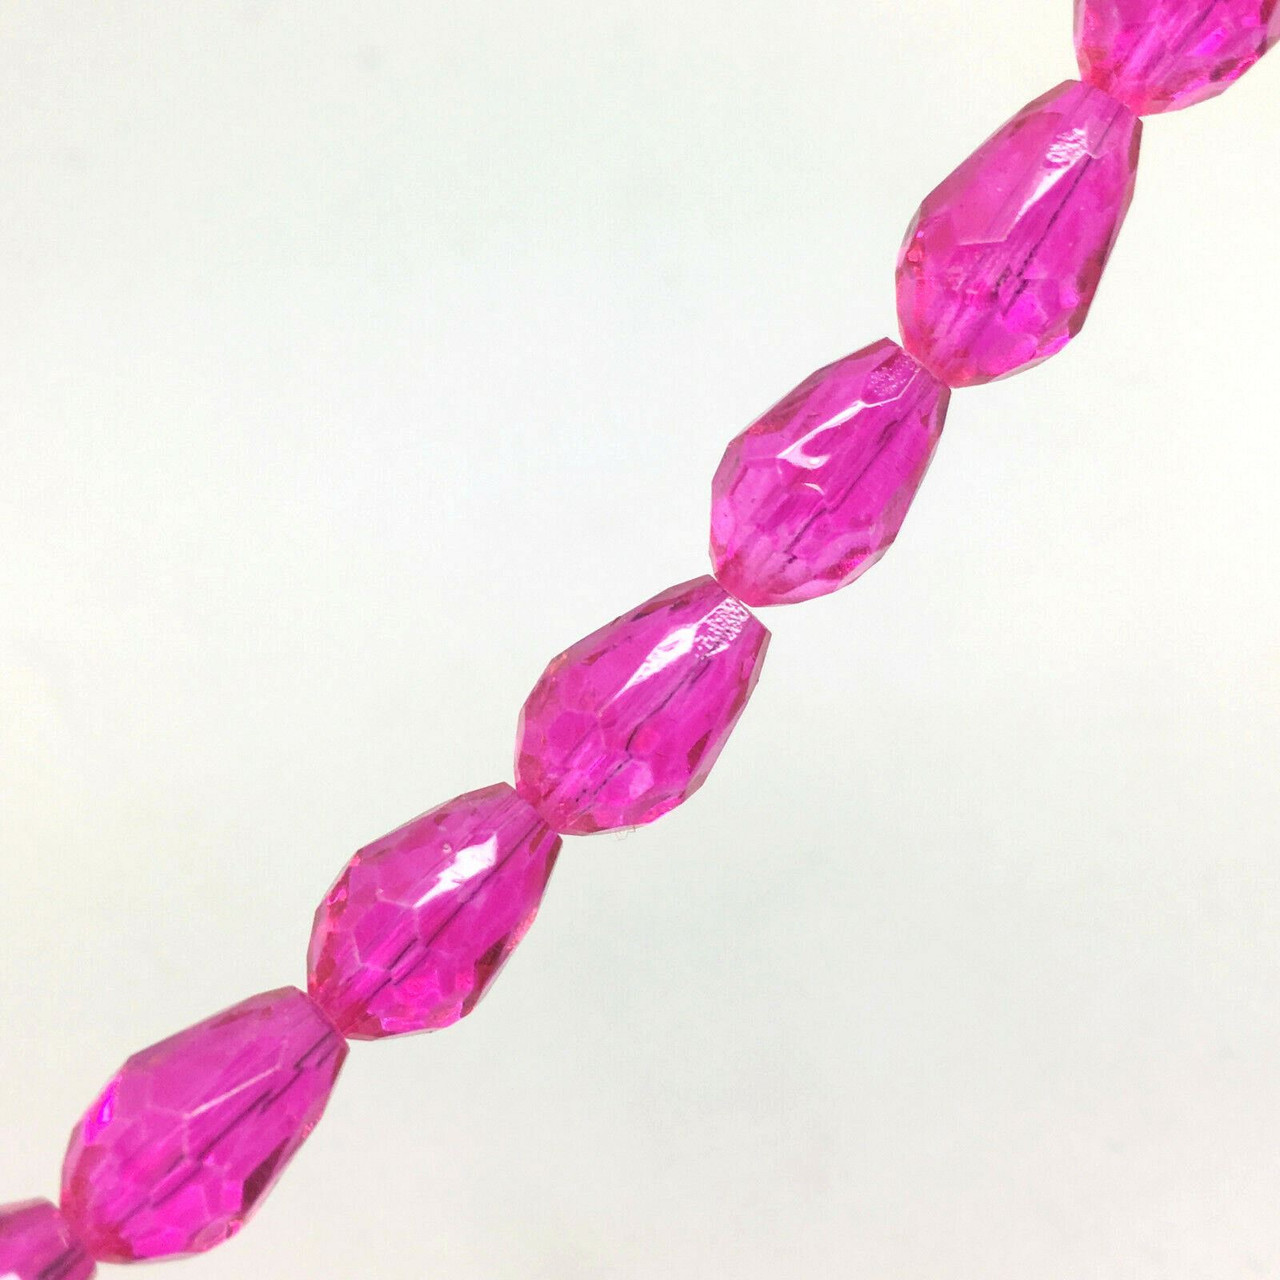 15mm x 10mm glass faceted tear drop beads (briolettes) pack of 24 beads - HOT PINK